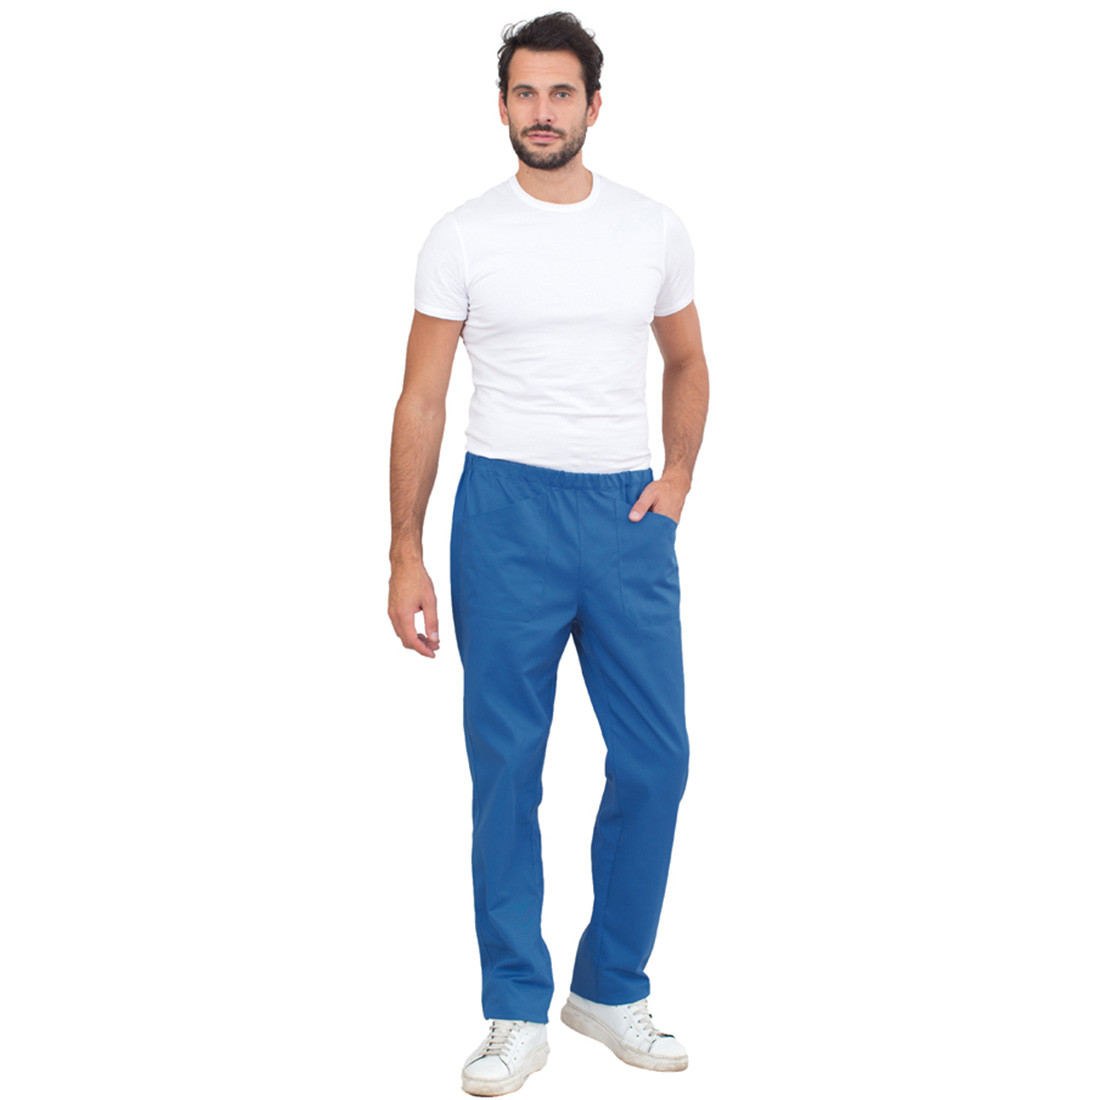 MILANO Chef's Trousers - Safetywear